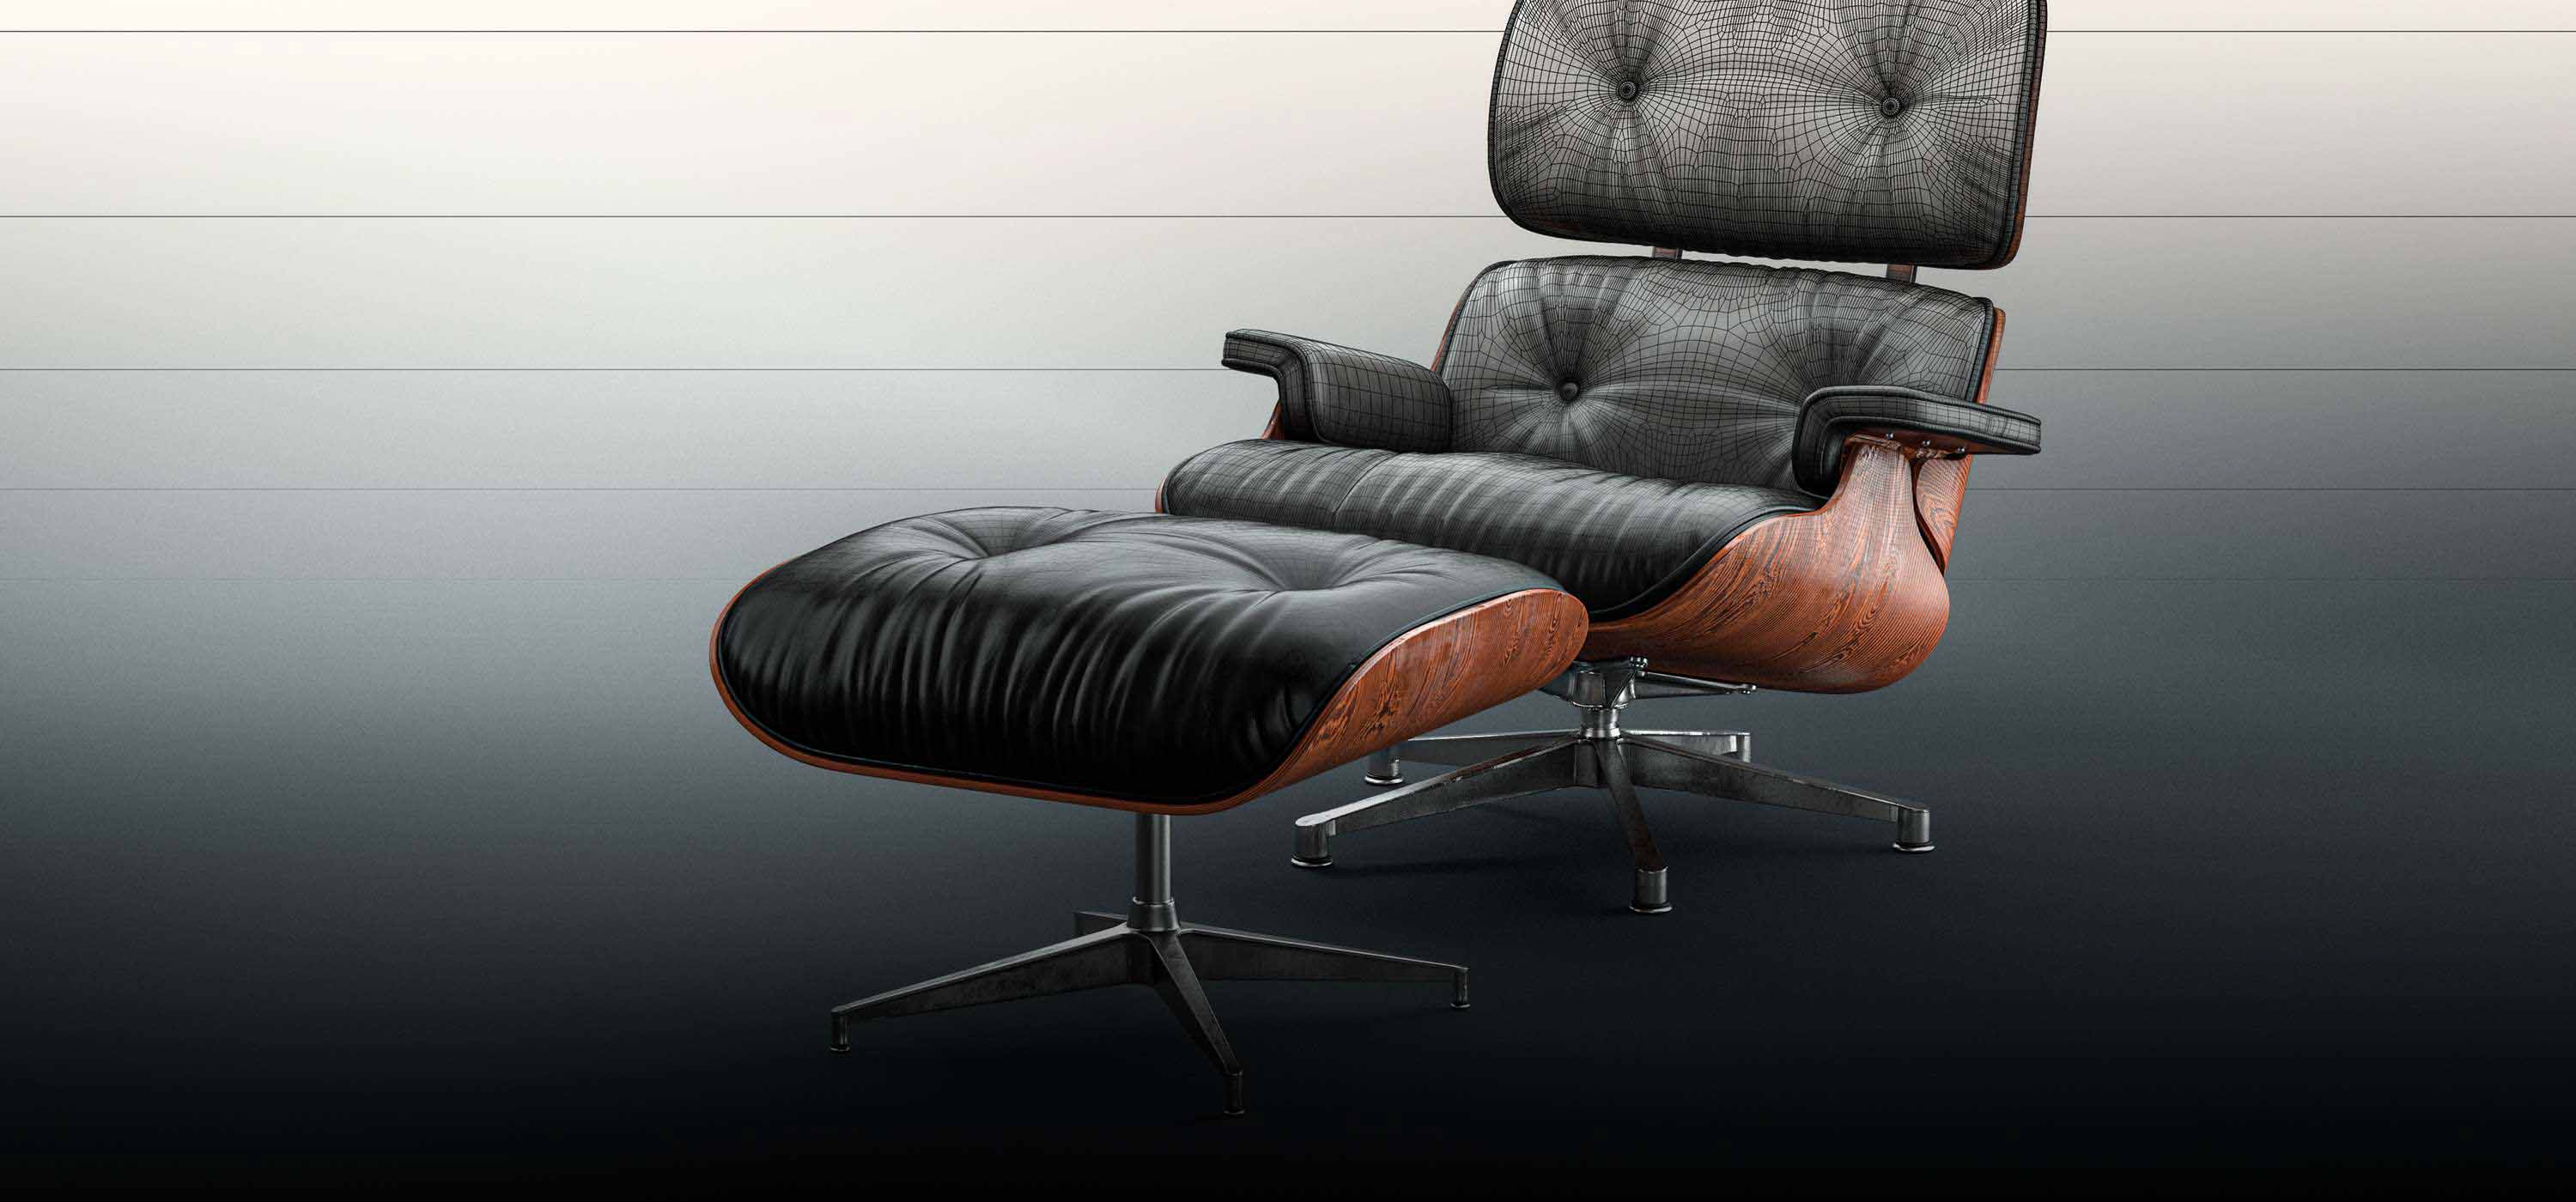 Eames Lounge Chair and Ottoman 3D Model Cinema 4d 3d models and photography studio assets for portraiture and portraits. pRO EDU